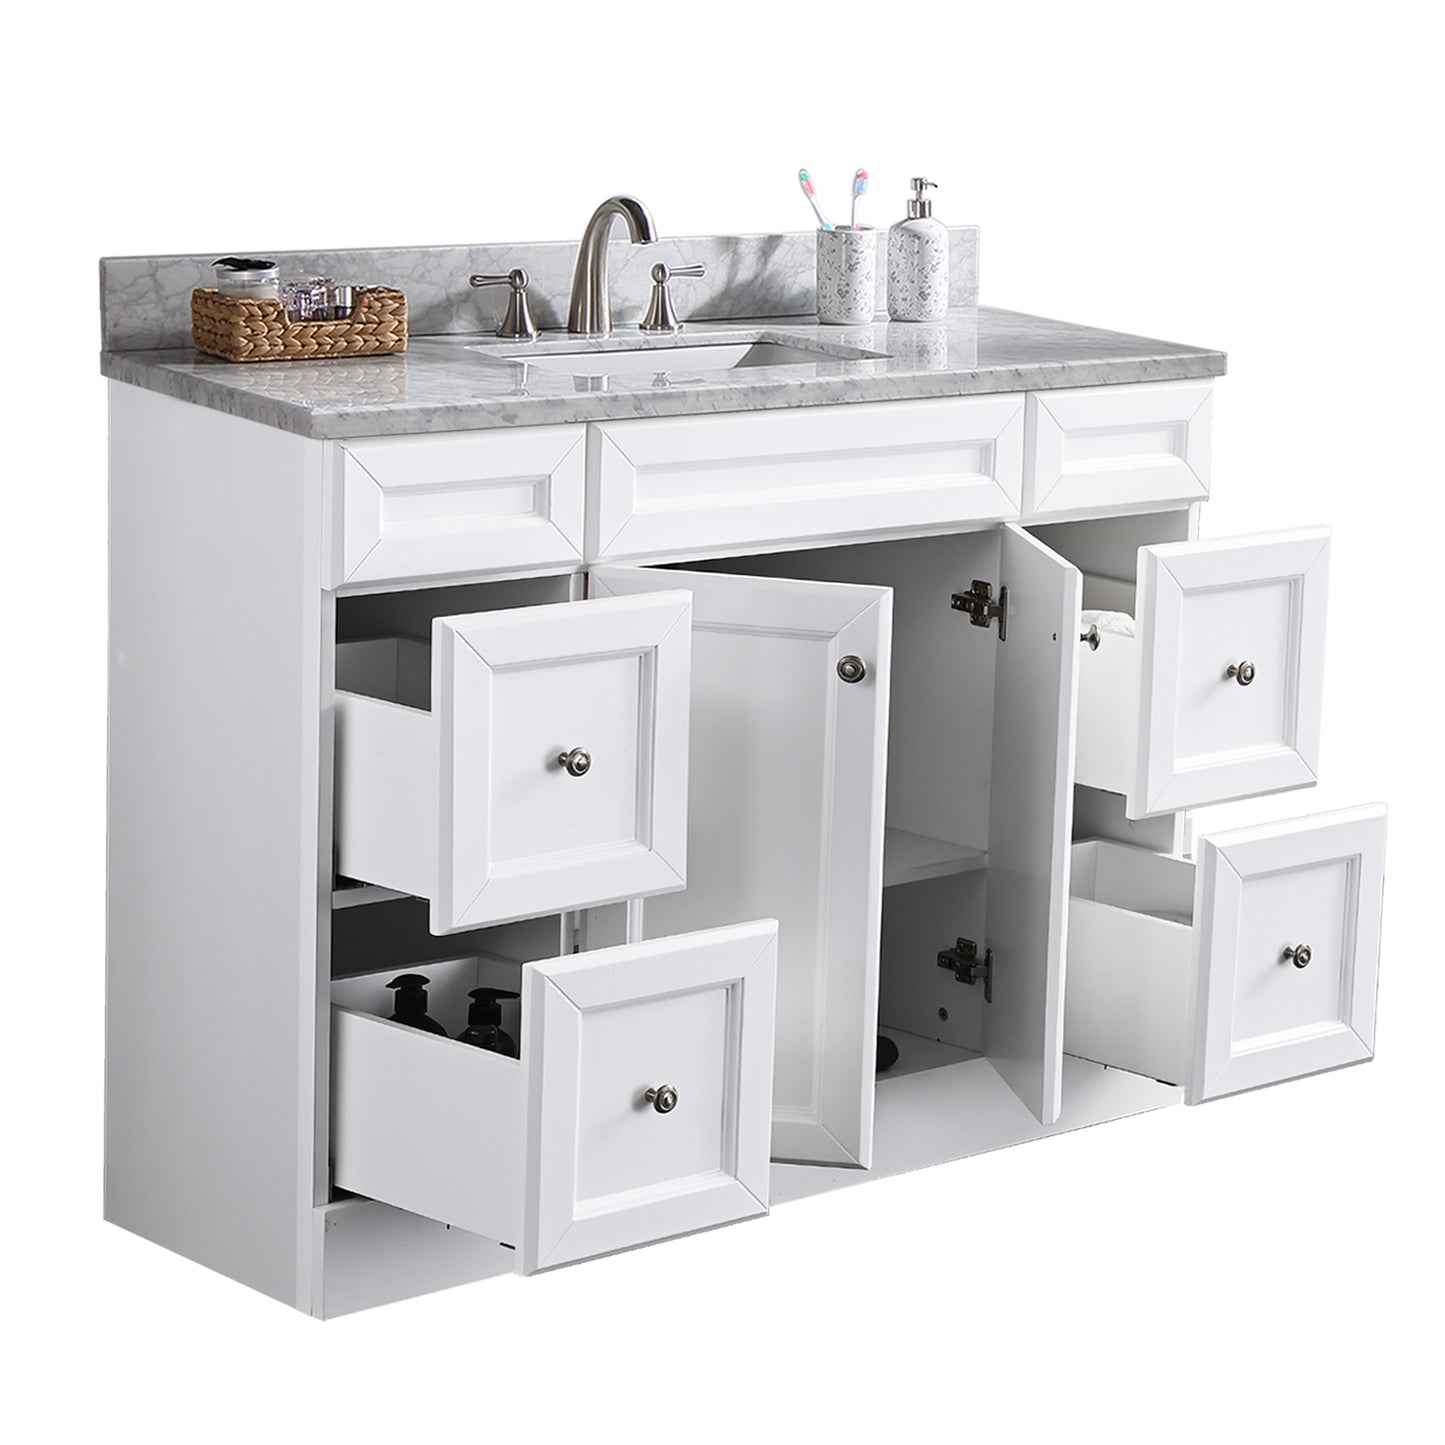 48 inch Bathroom Vanity Set, with Drawers, Carrara White Marble Top, 3 Faucet Hole